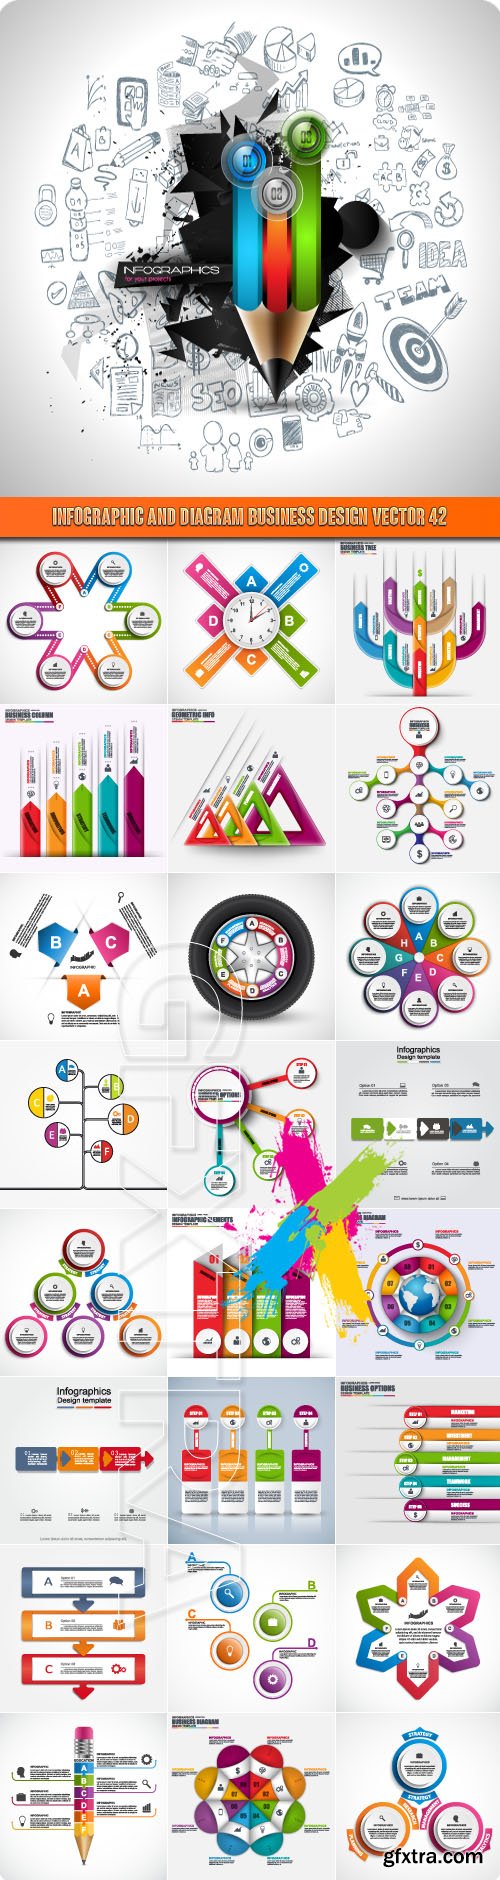 Infographic and diagram business design vector 42